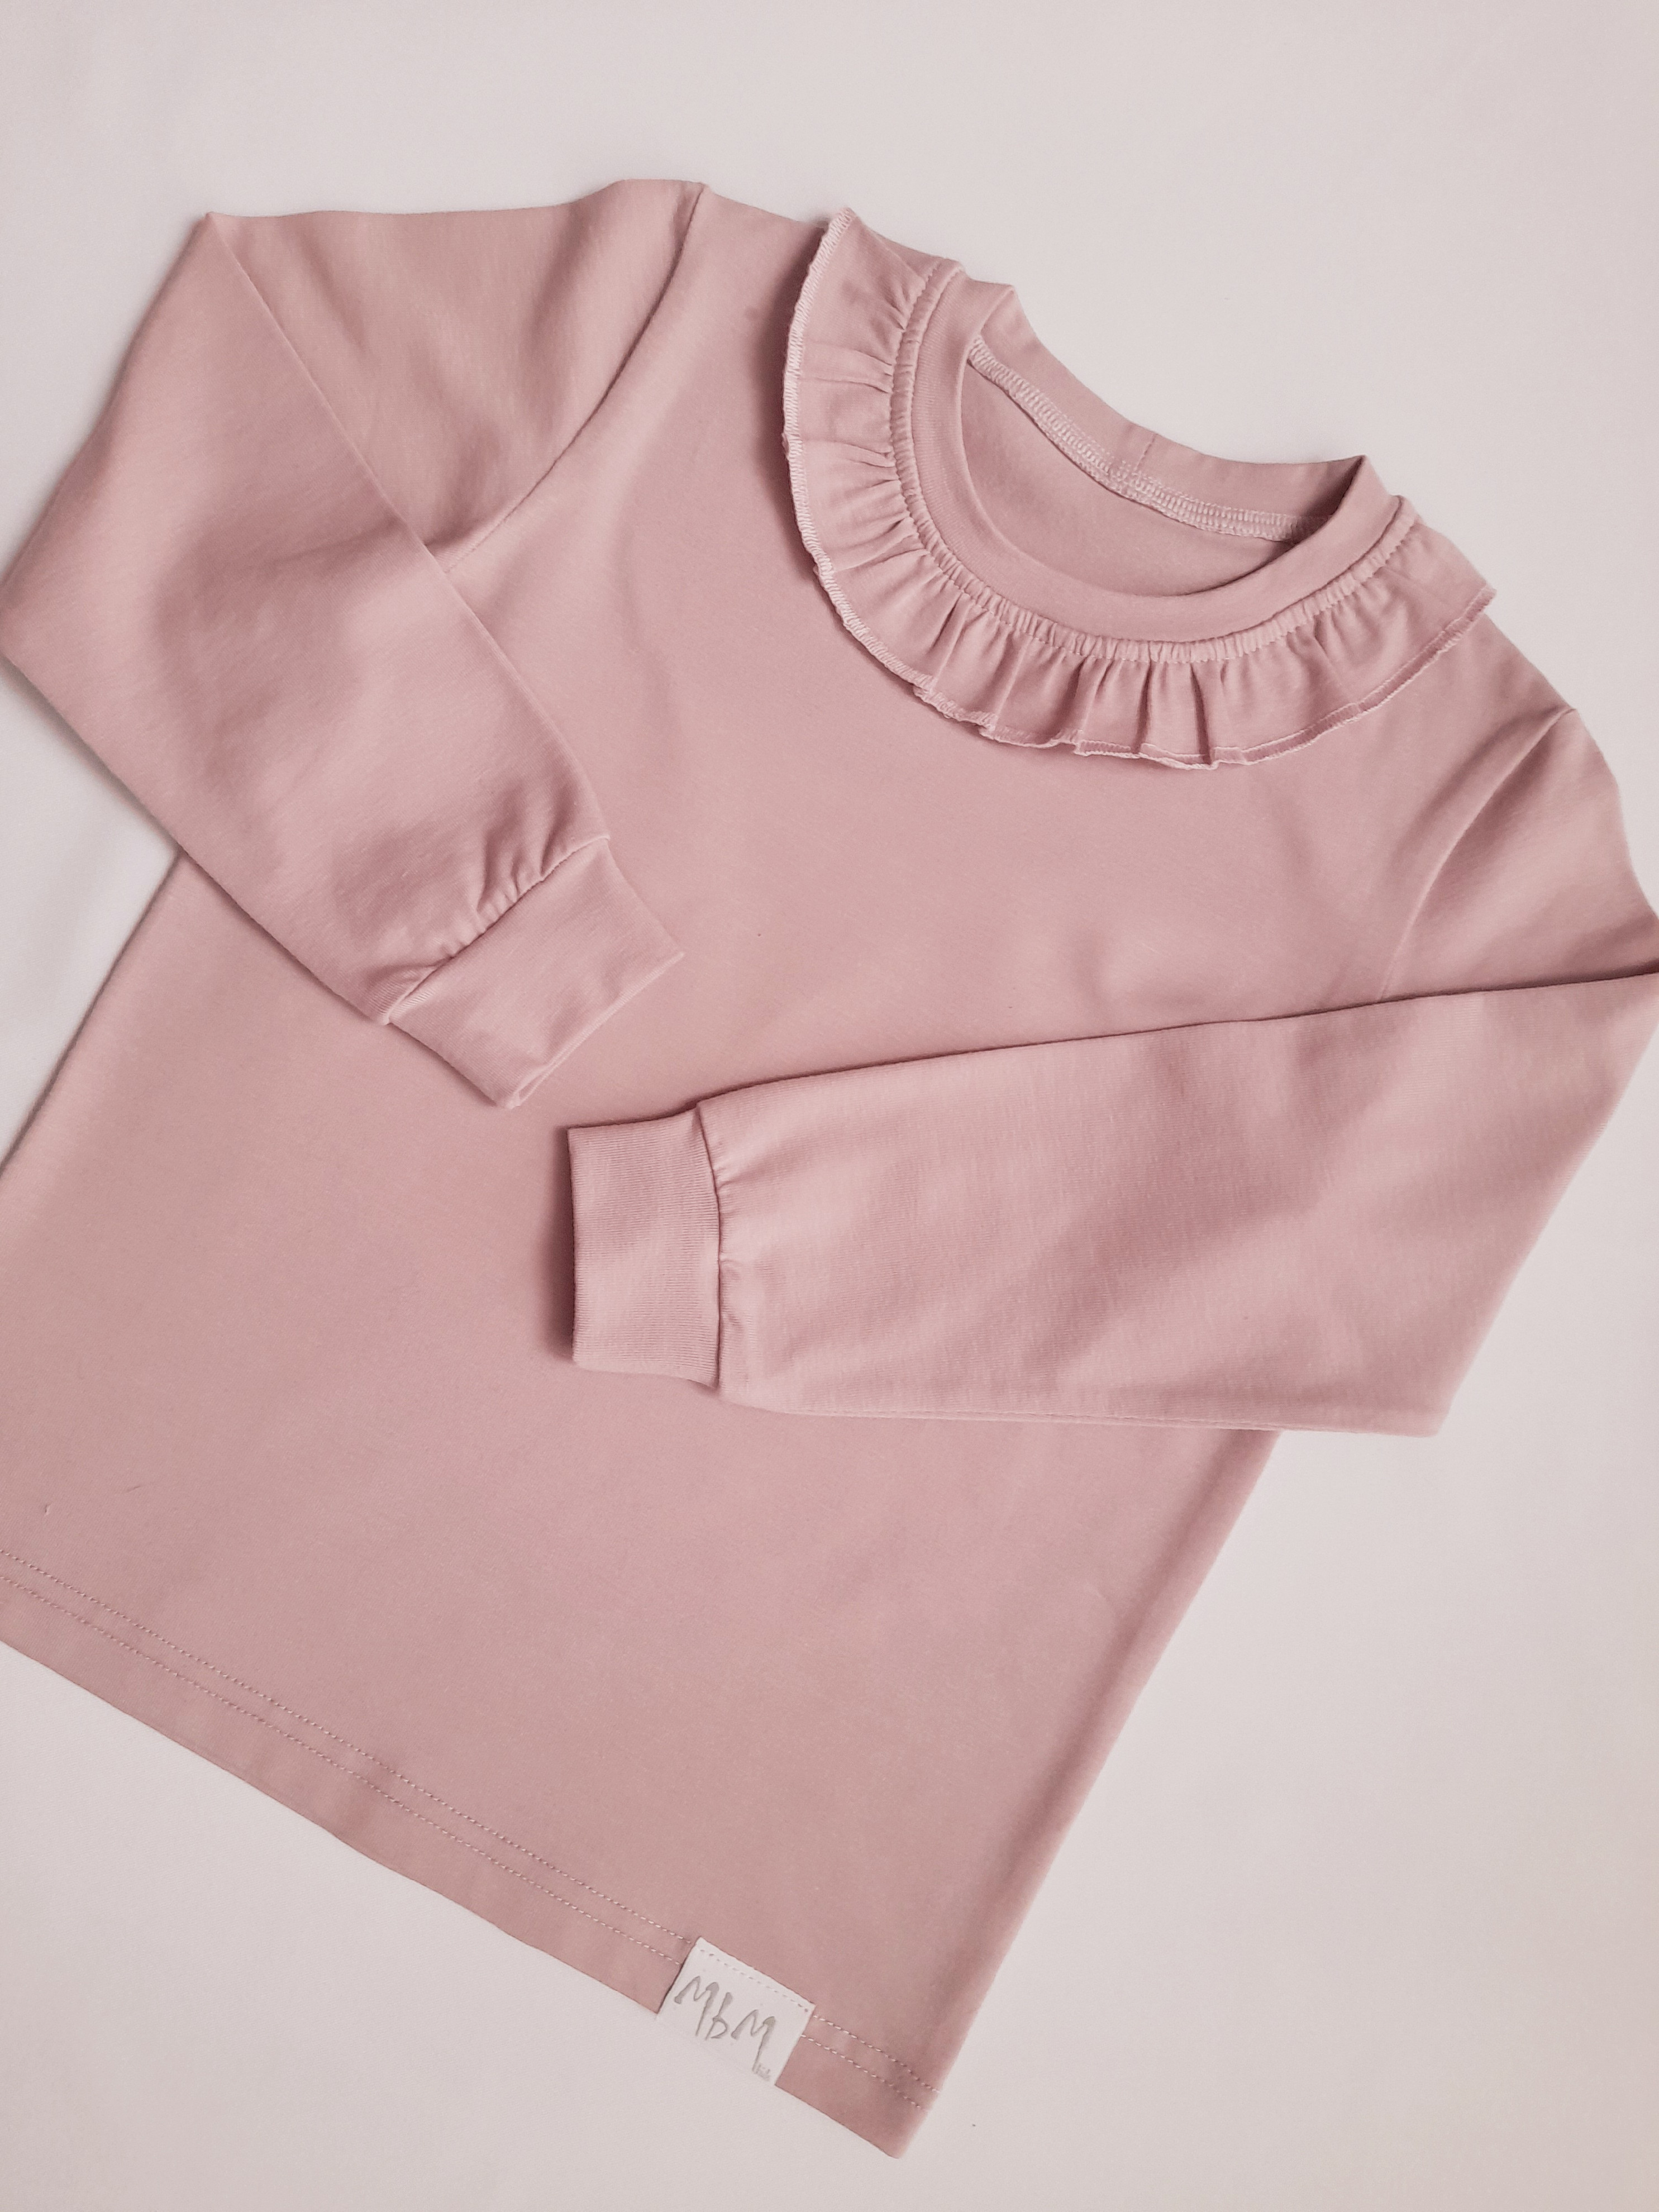 CHILD T-SHIRT DUSTY PINK Velikost: 86